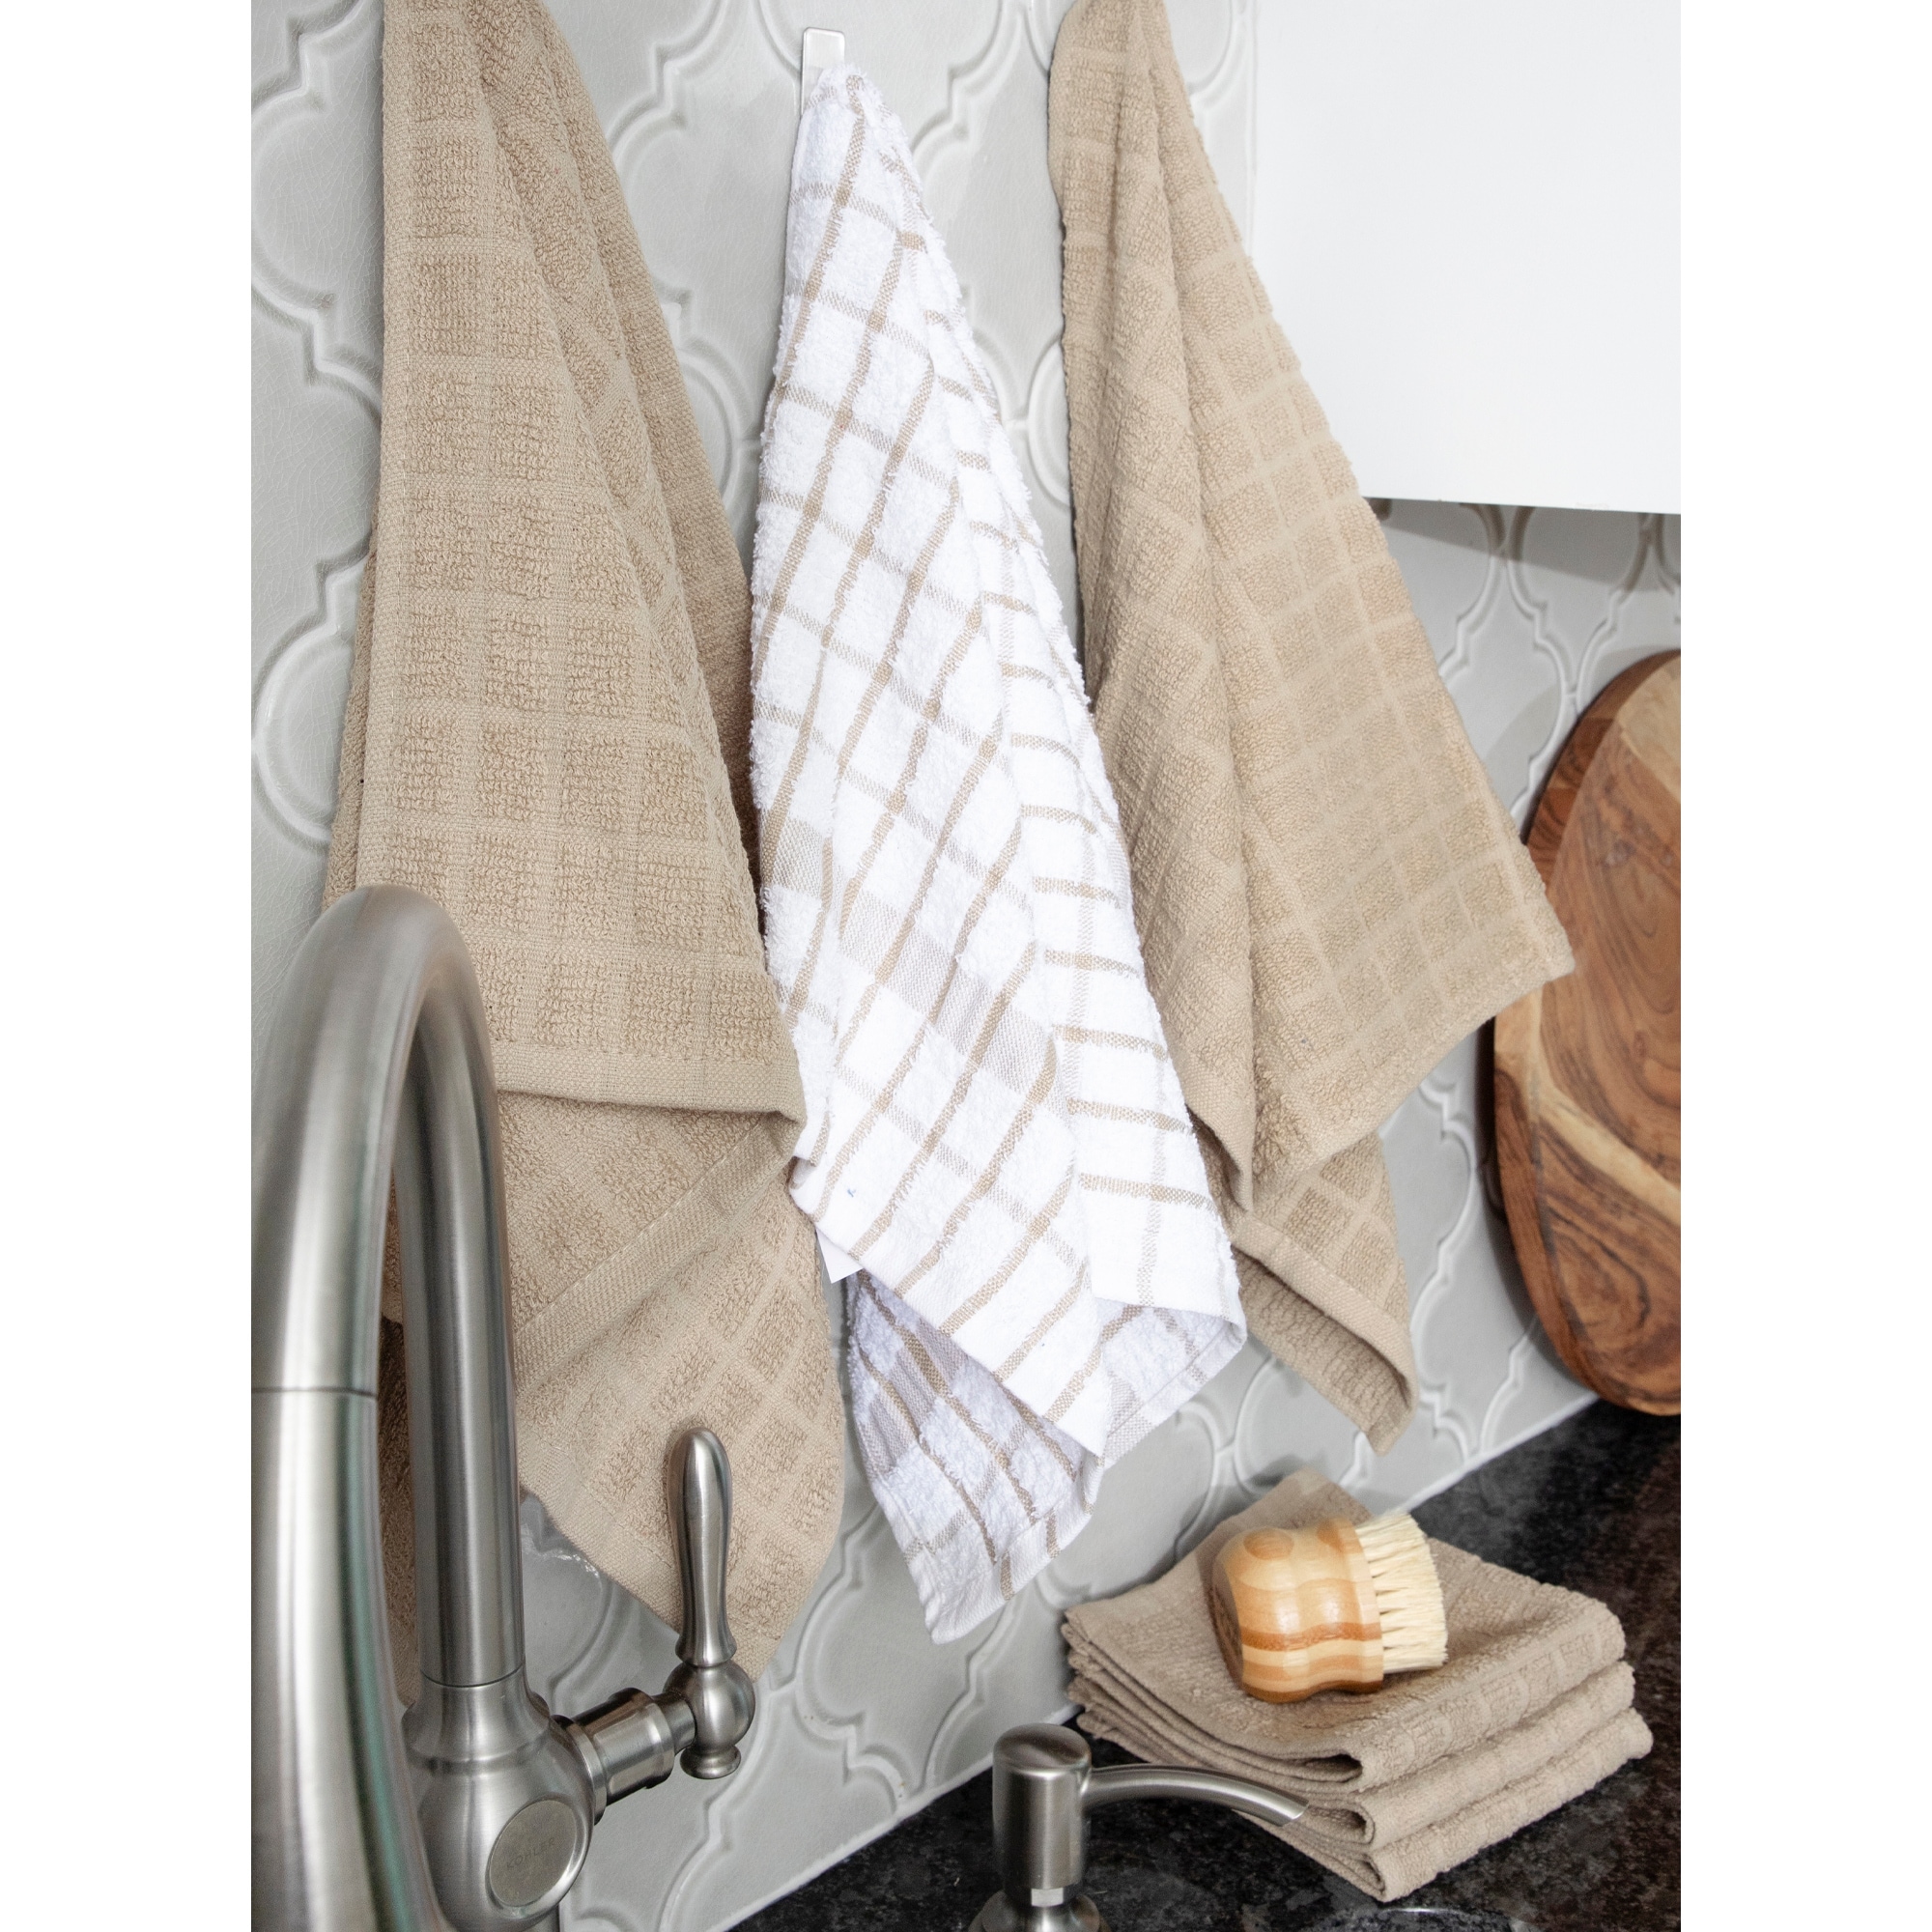 https://ak1.ostkcdn.com/images/products/is/images/direct/41bfc813b3208cd83fba4dcd8df848bc7e405634/RITZ-Terry-Kitchen-Towel-and-Dish-Cloth%2C-Set-of-3-Towels-and-3-Dish-Cloths.jpg